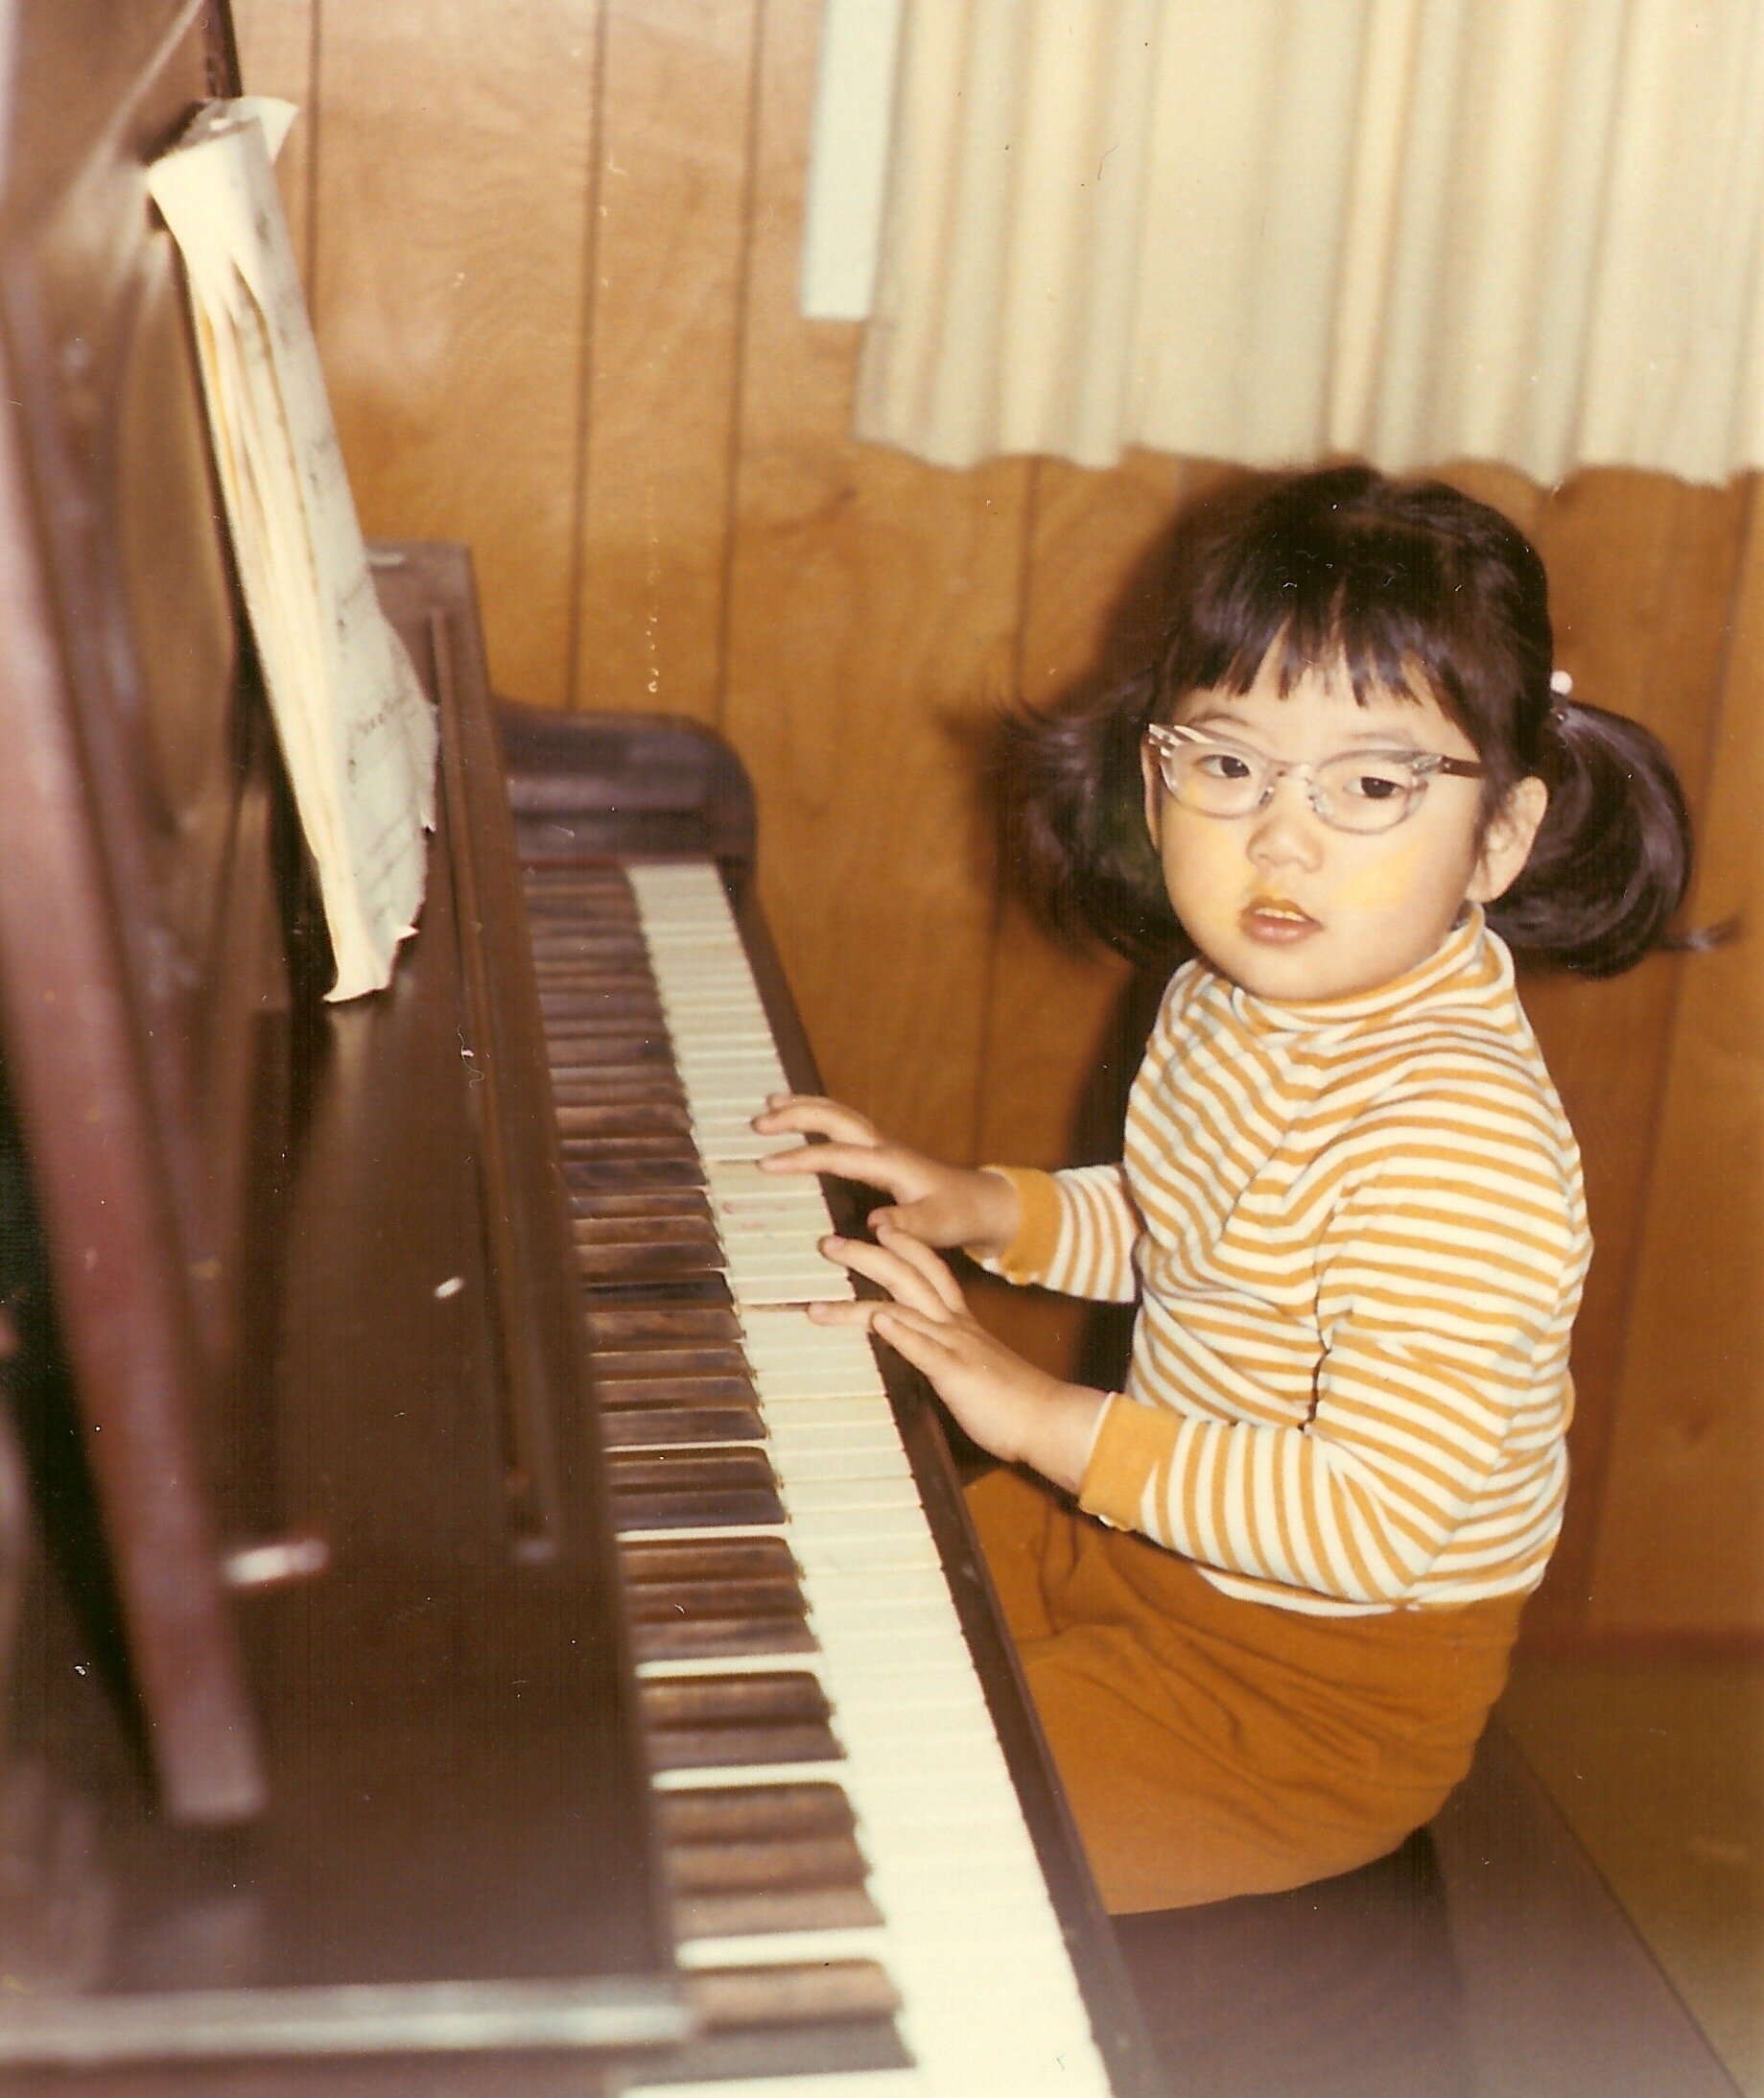 Anne at her childhood piano.